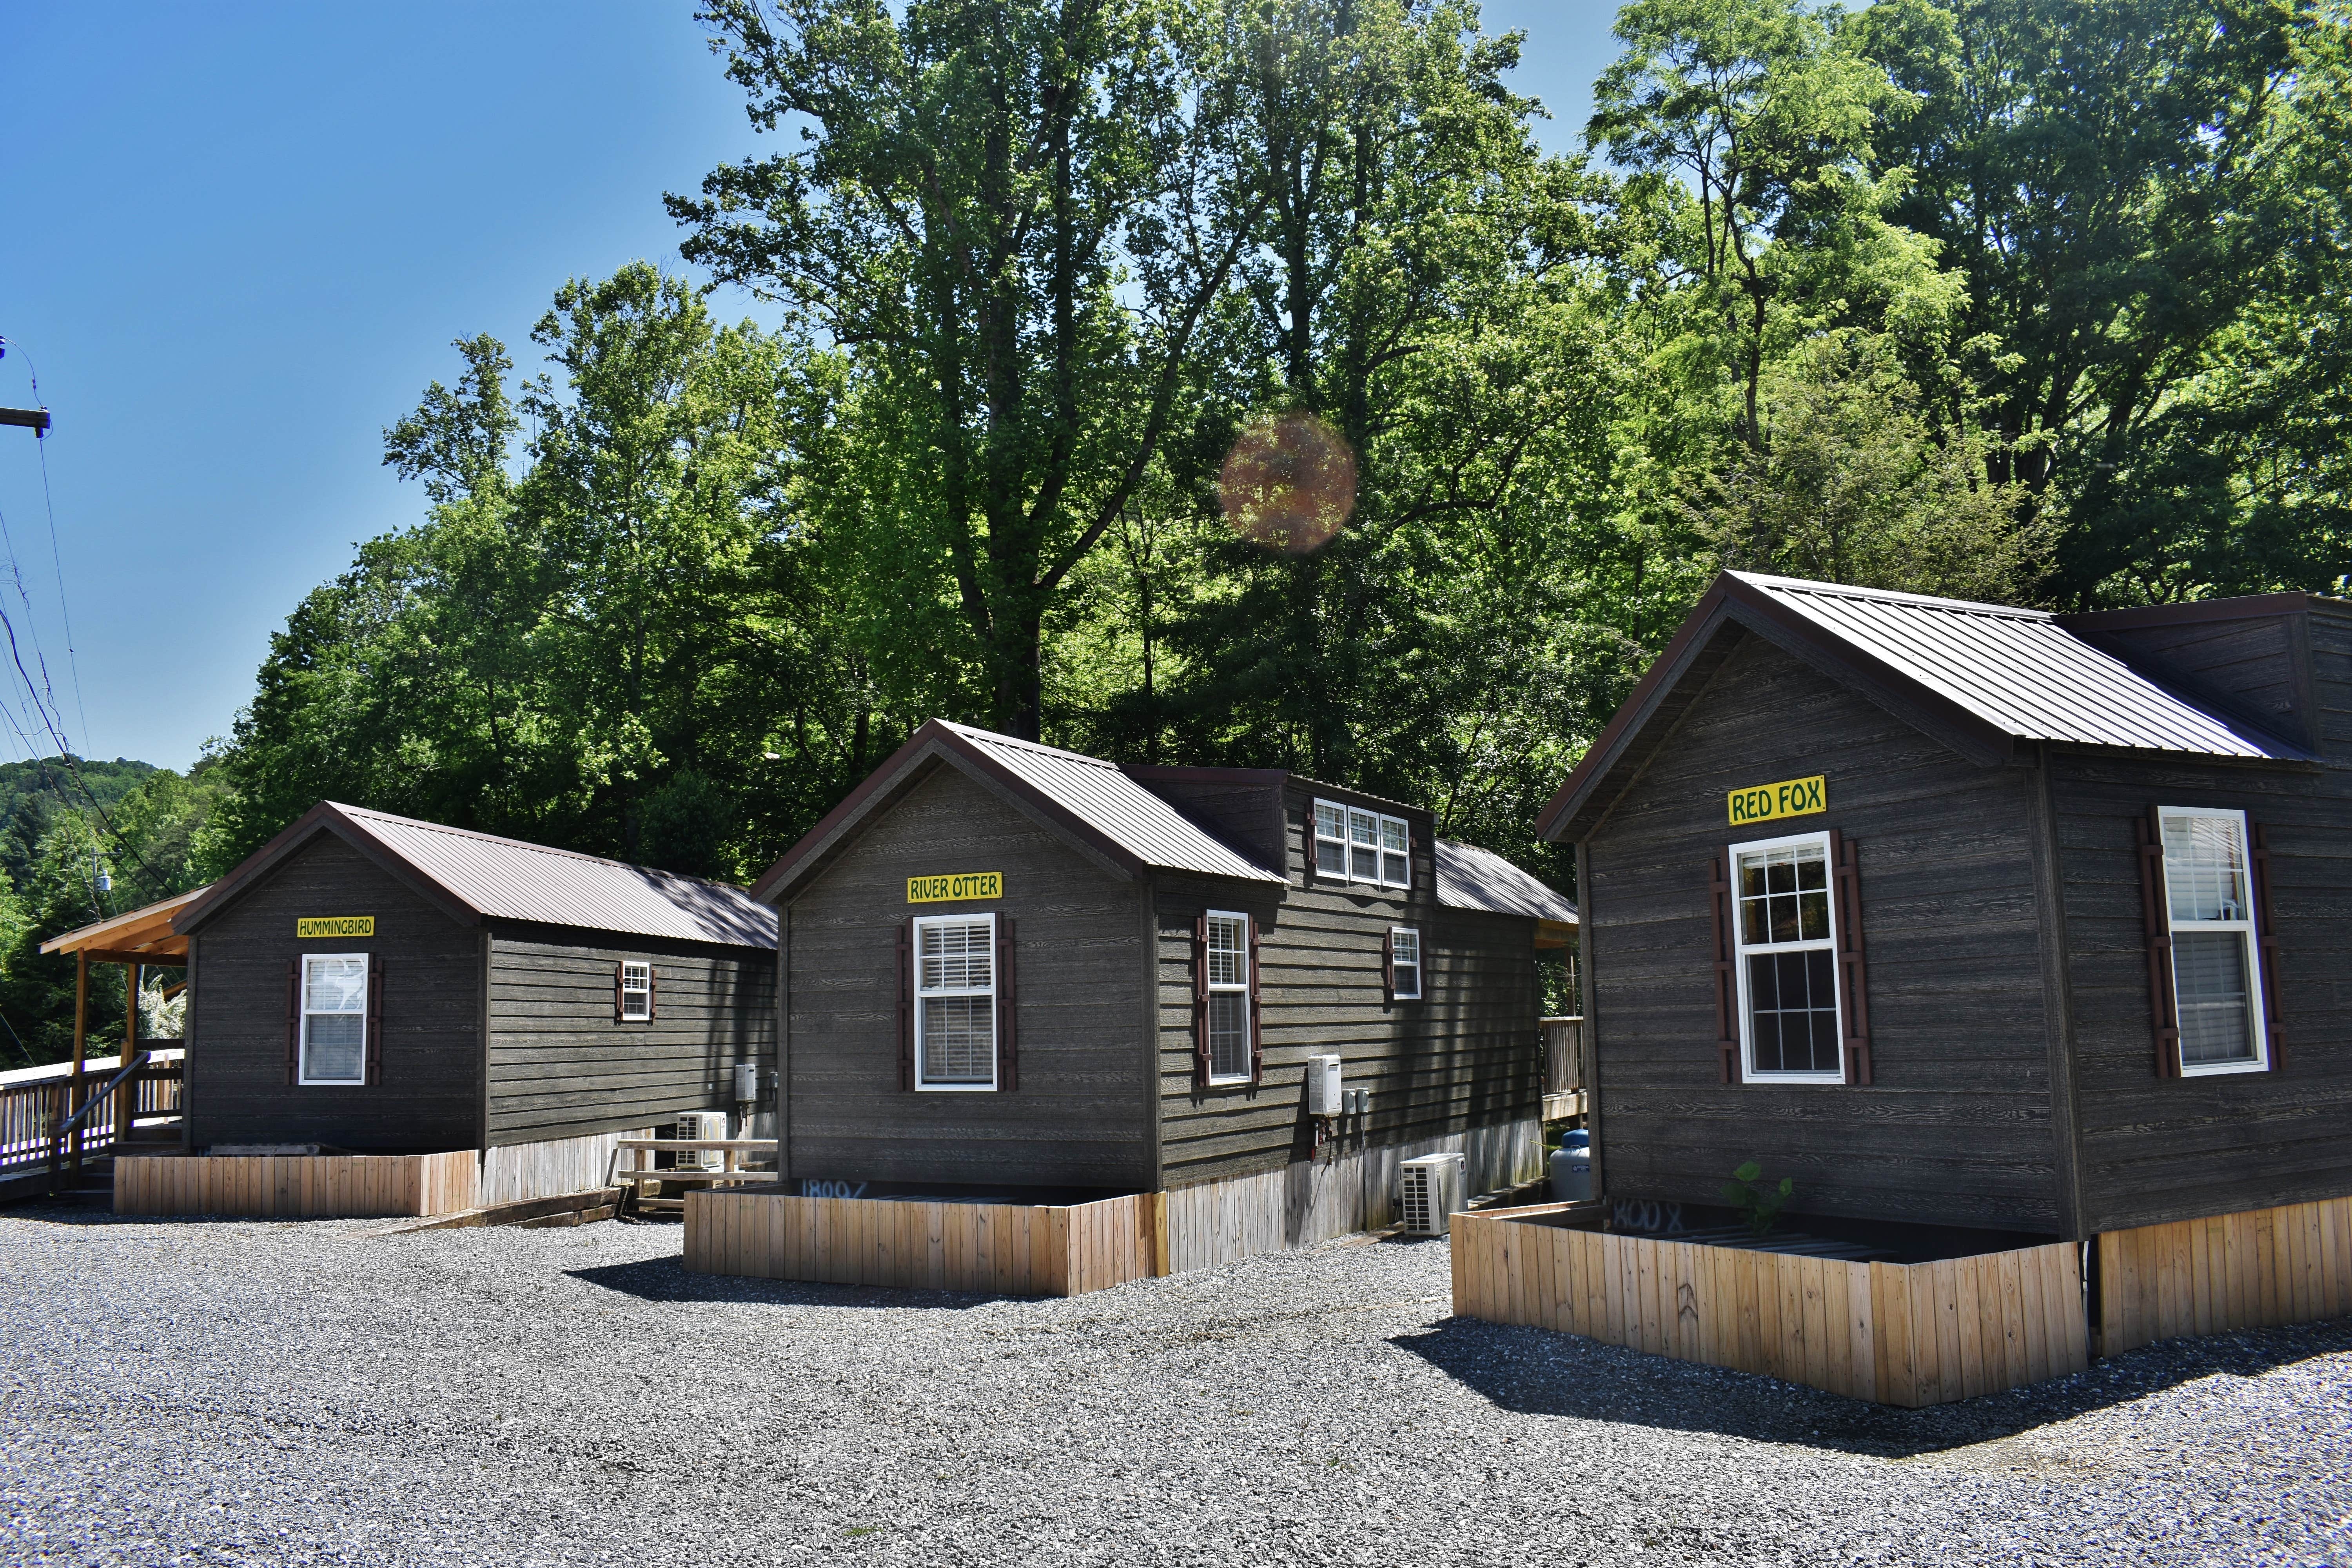 More cabins to rent